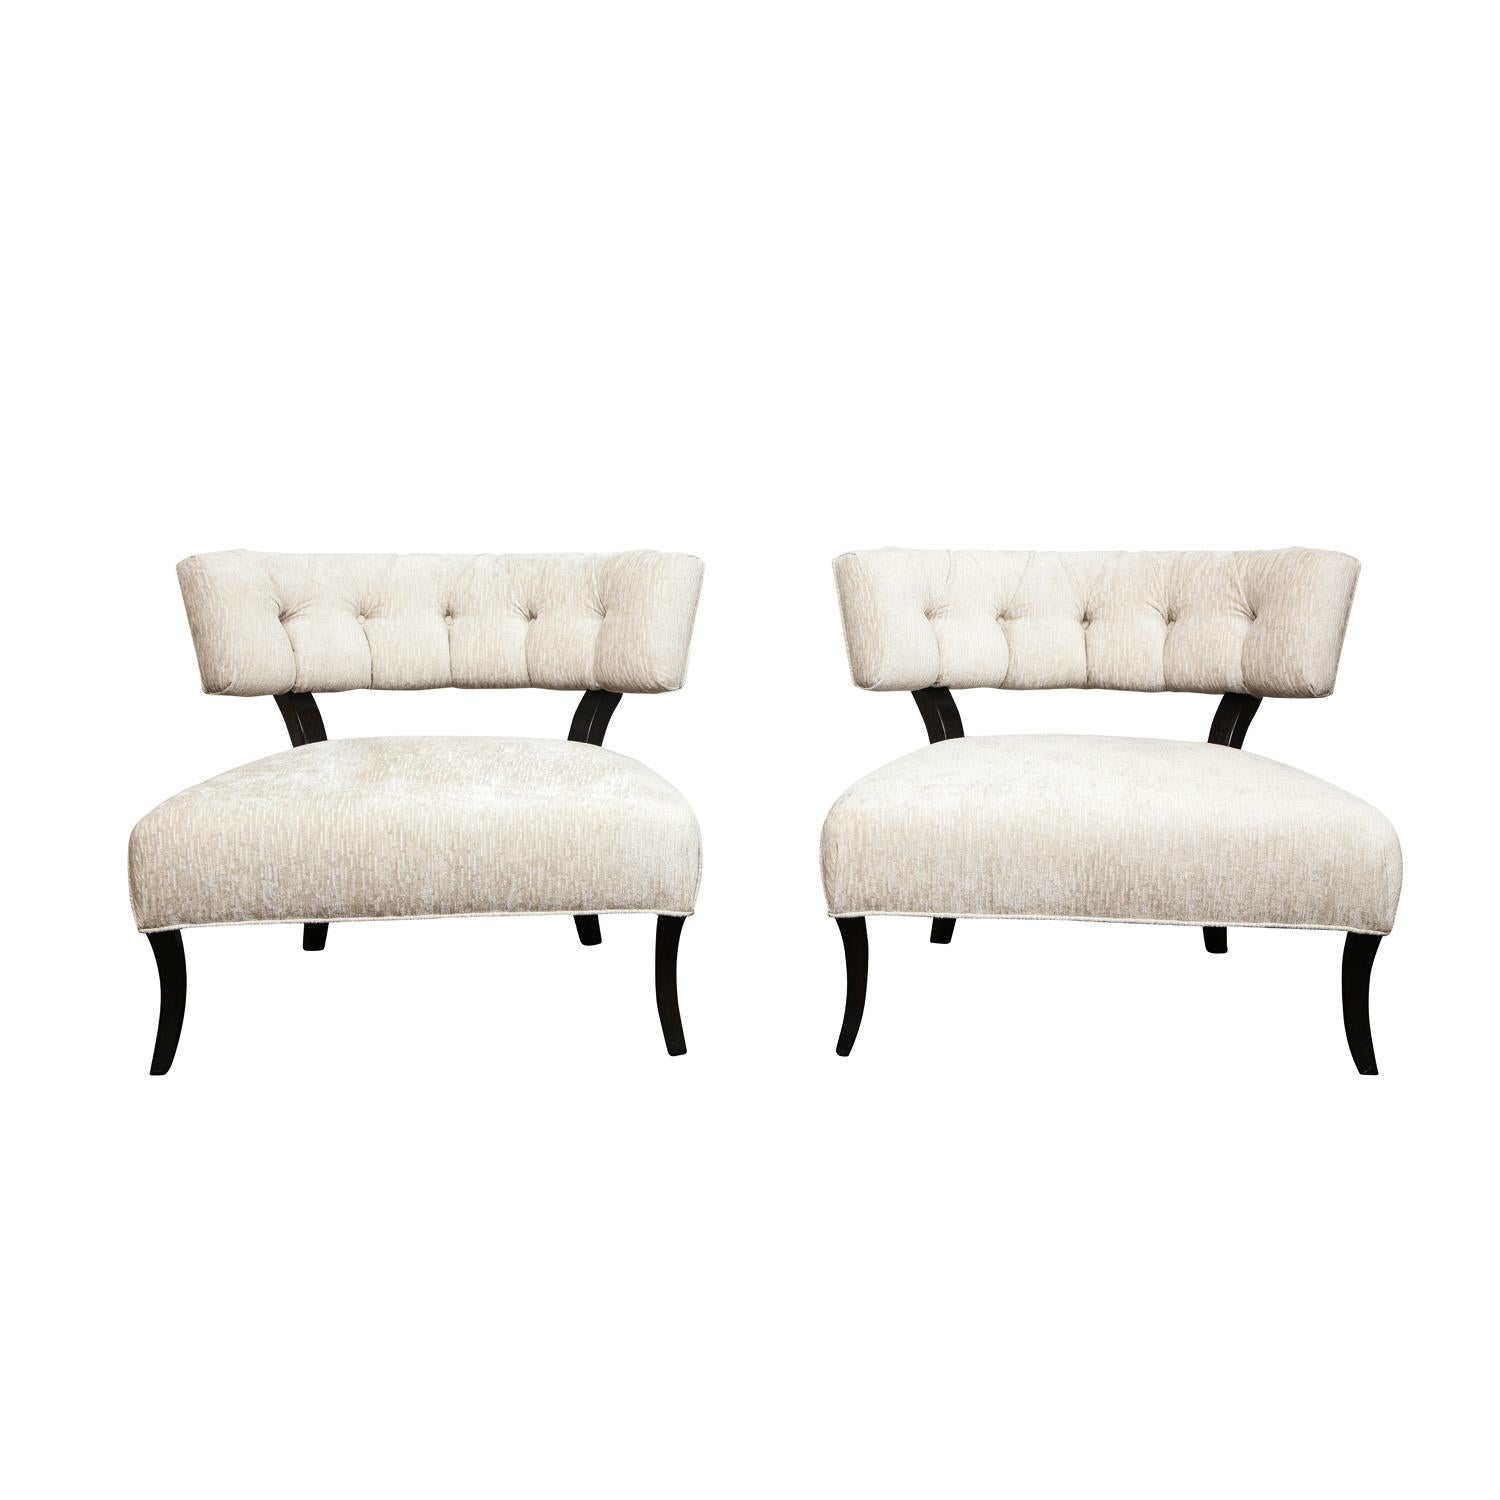 Pair of elegant slipper chairs, tufted backs with gently curving legs, in the manner of Billy Haines, American 1940's. These chairs have beautiful scale and are very comfortable. These have been newly reupholstered and refinished by Lobel Modern.